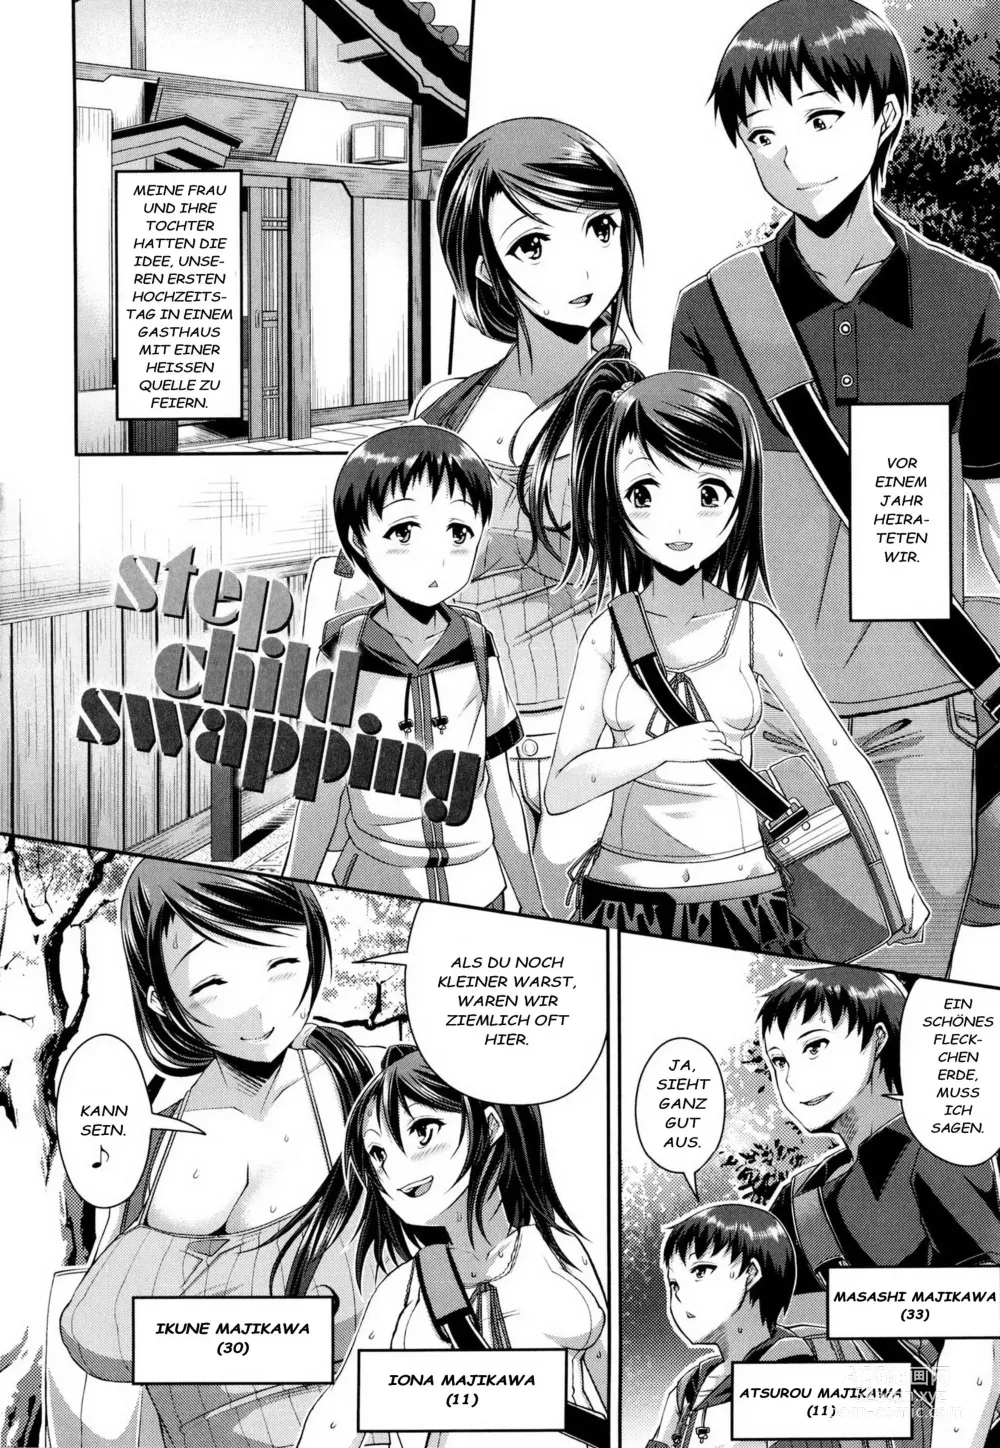 Page 2 of manga Step Child Swapping (decensored)